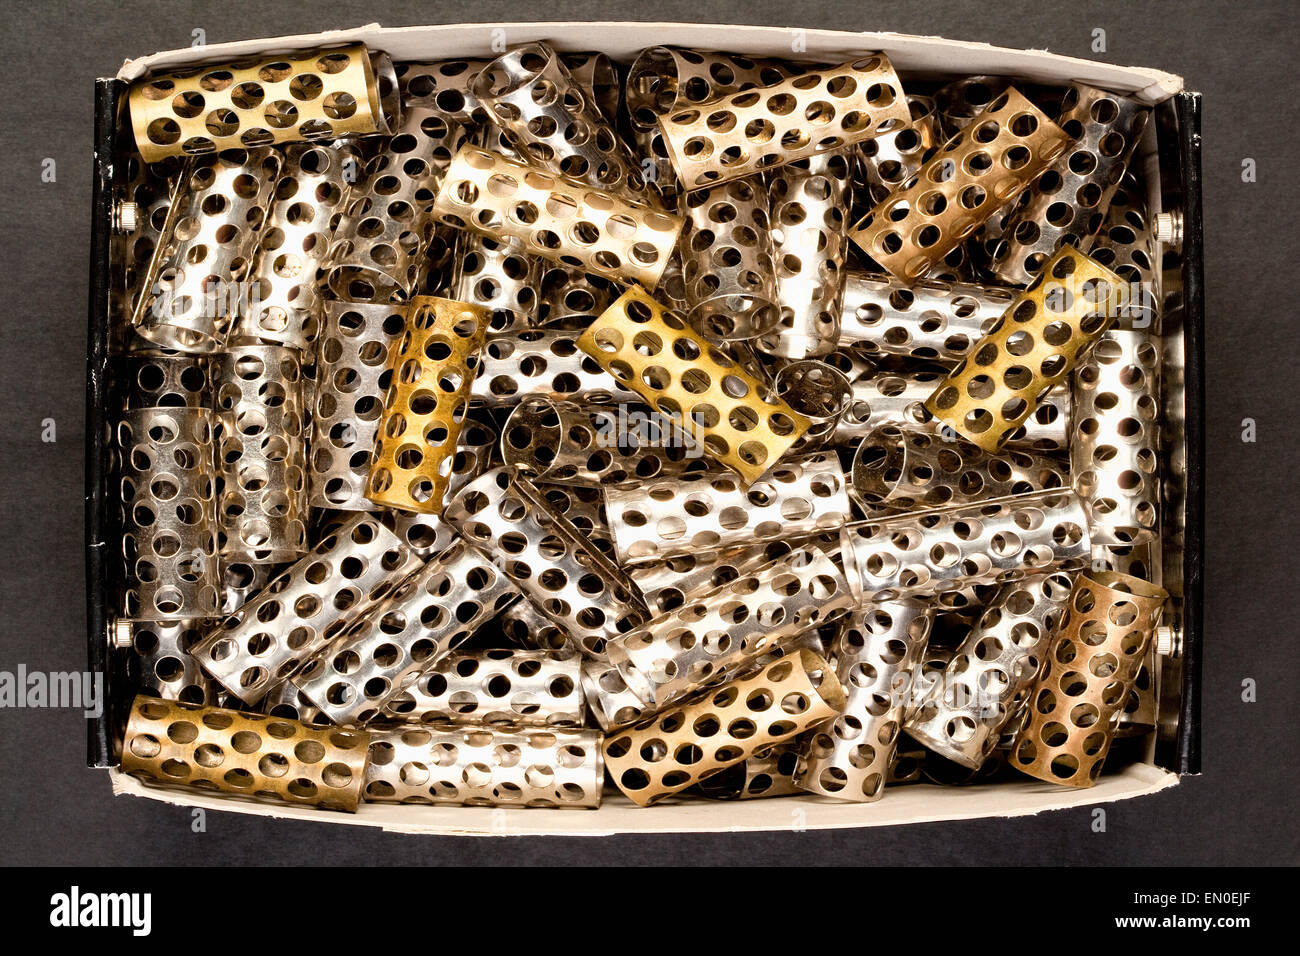 Closeup of Old Hair Rollers in a Box Stock Photo